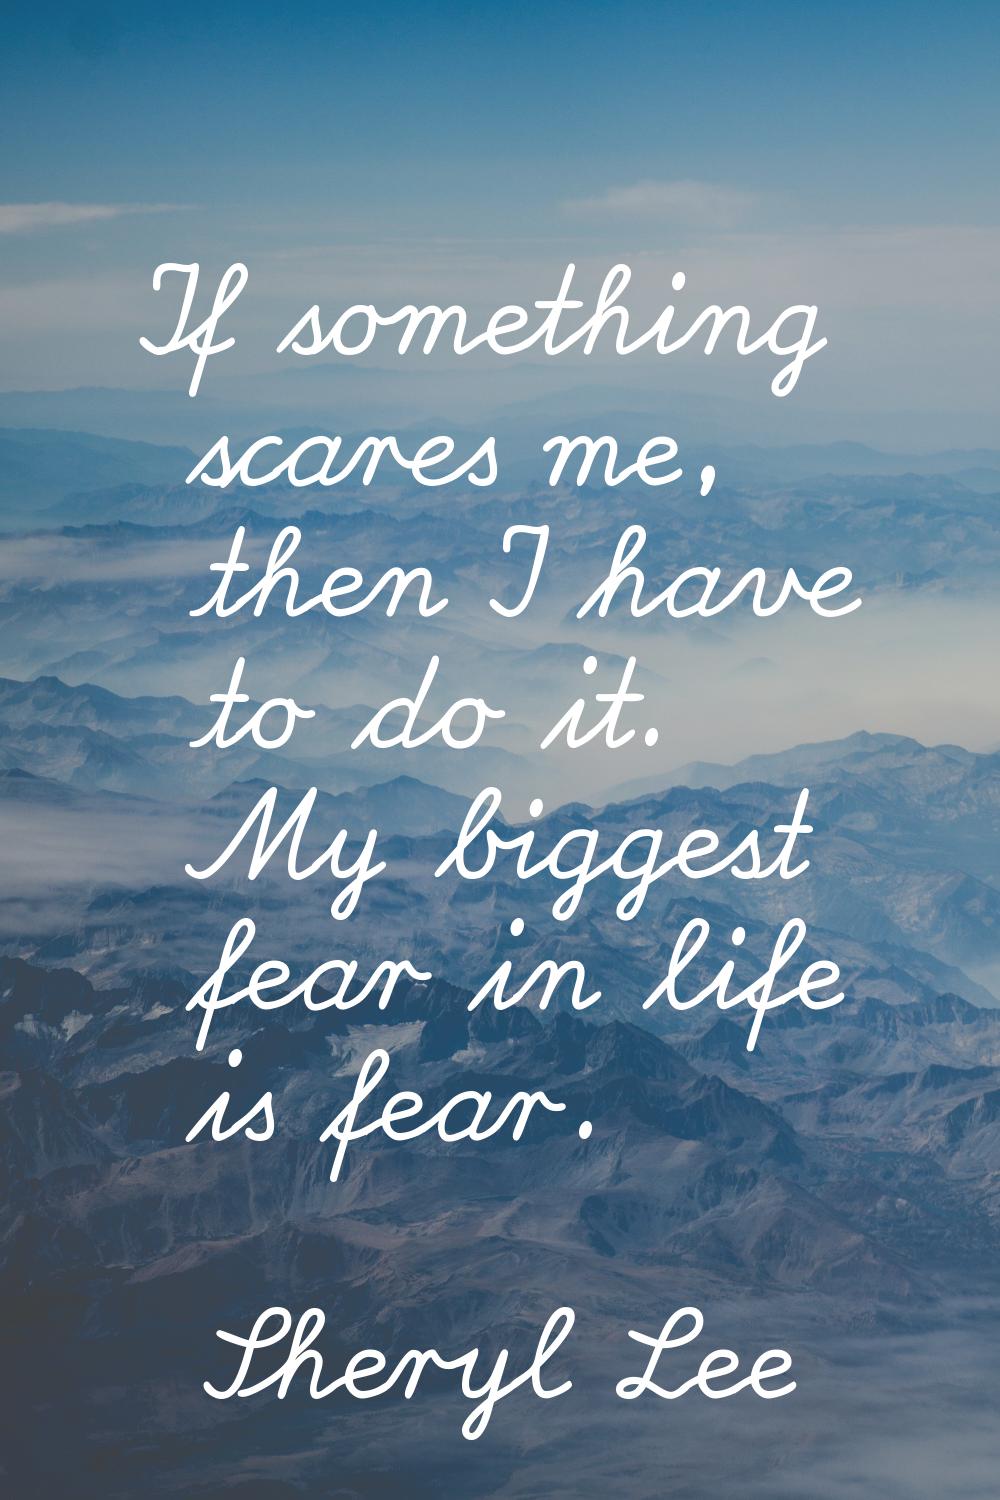 If something scares me, then I have to do it. My biggest fear in life is fear.